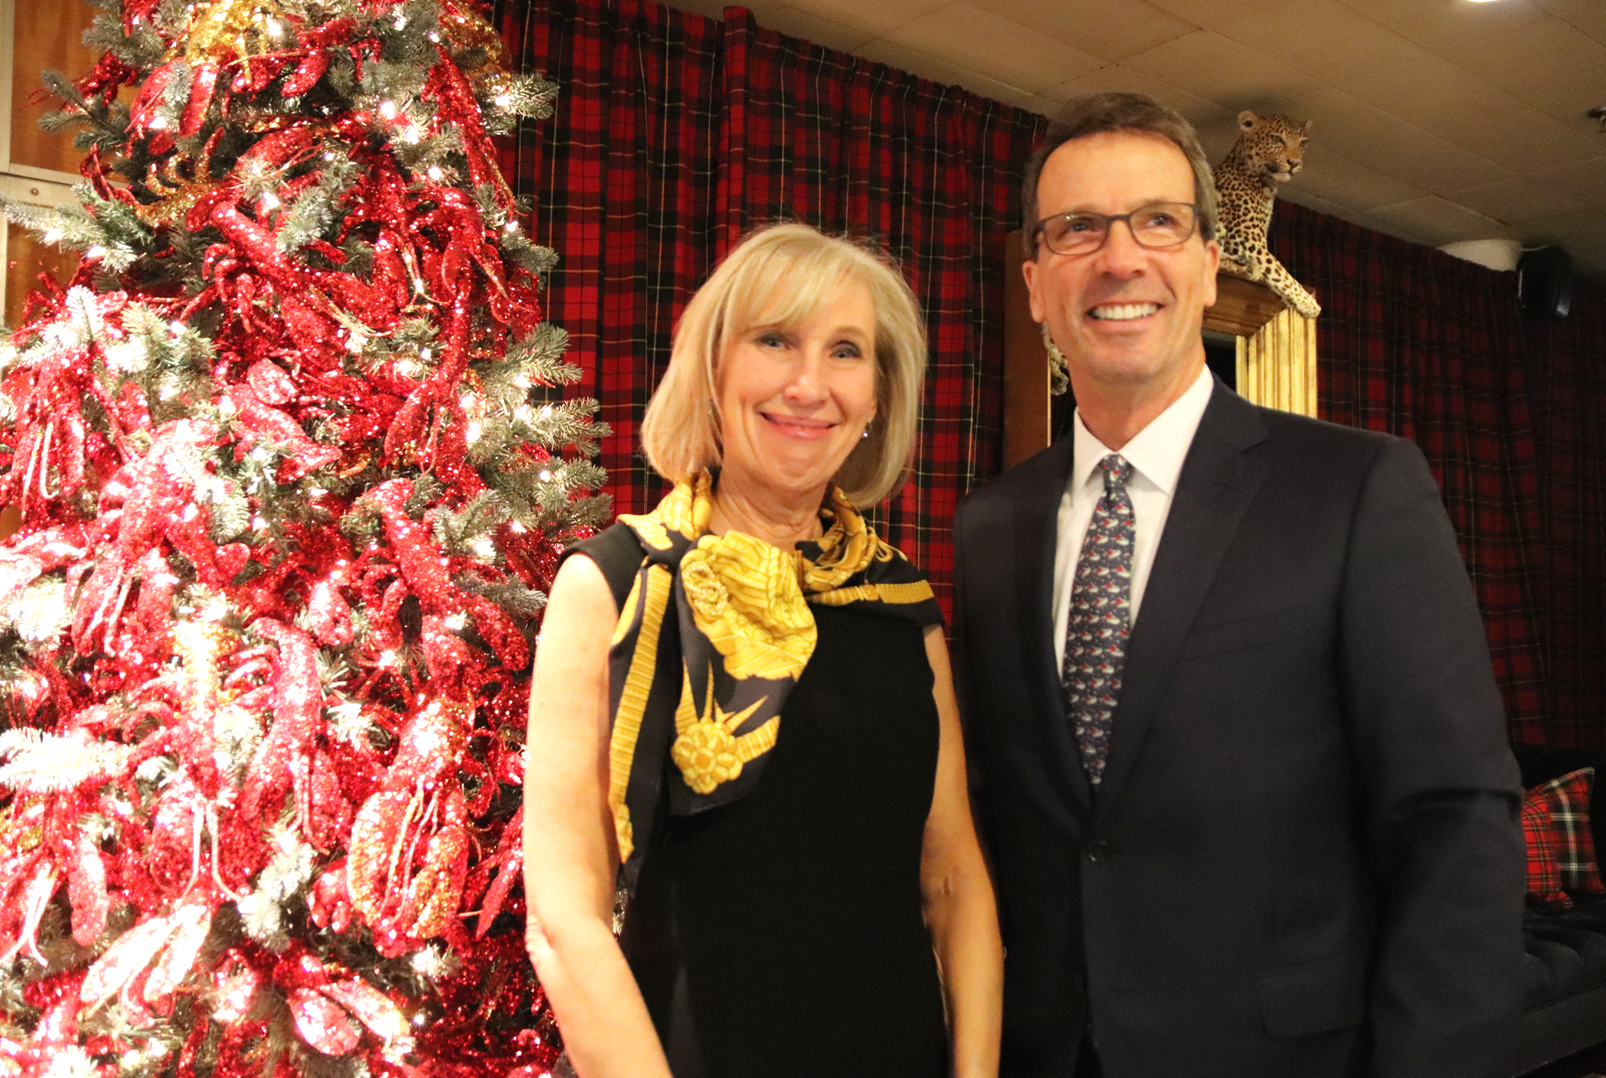 Debra Mecky, Executive Director and CEO of the Historical Society and David Rabin, CEO of the Greenwich United Way. Dec 6, 2019